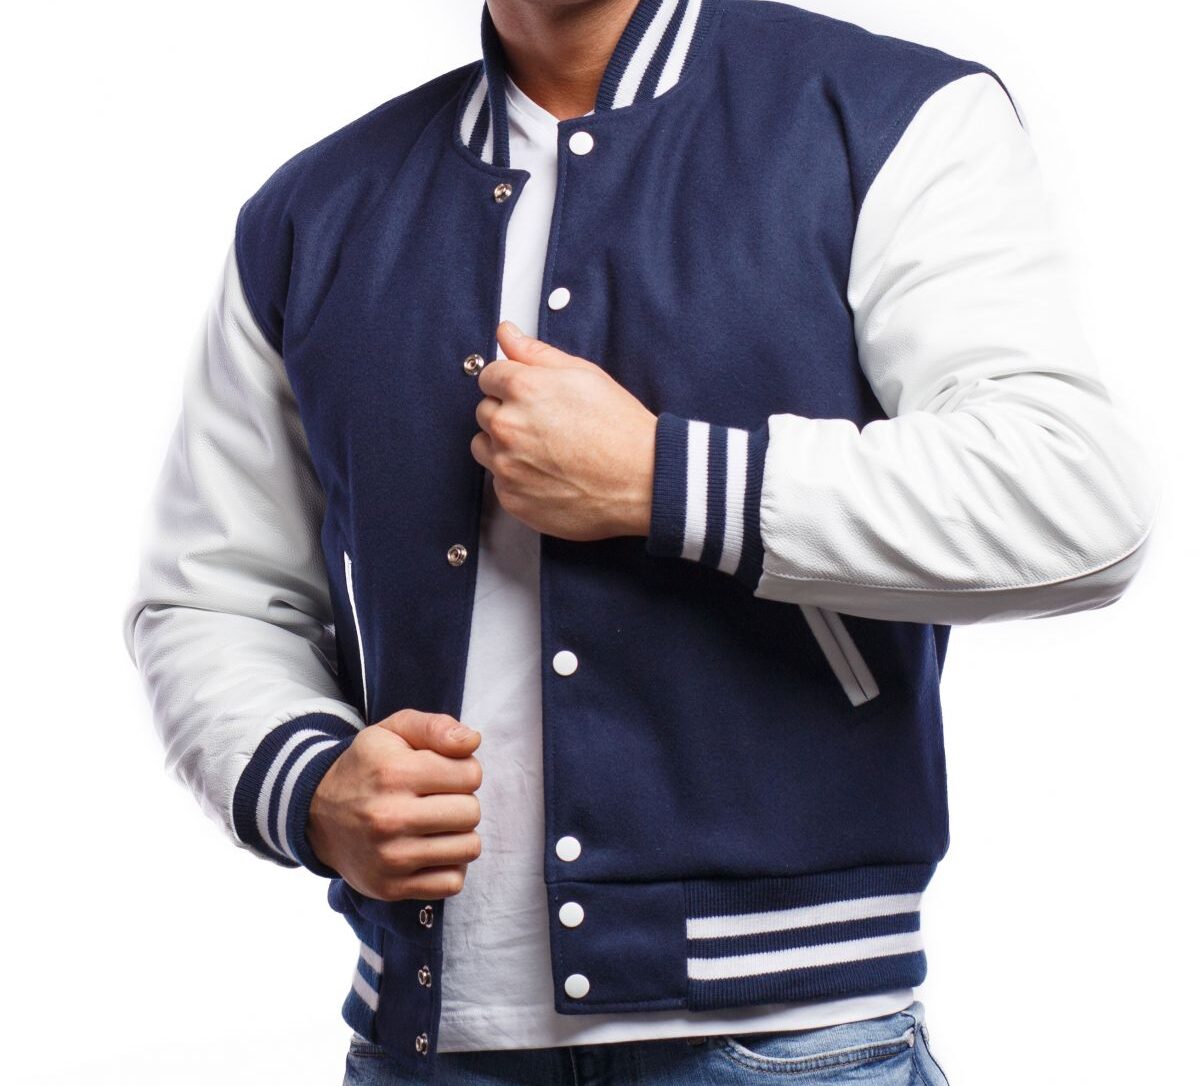 Varsity Jacket with Royal Blue Wool Body & Bright White Leather Sleeves ...